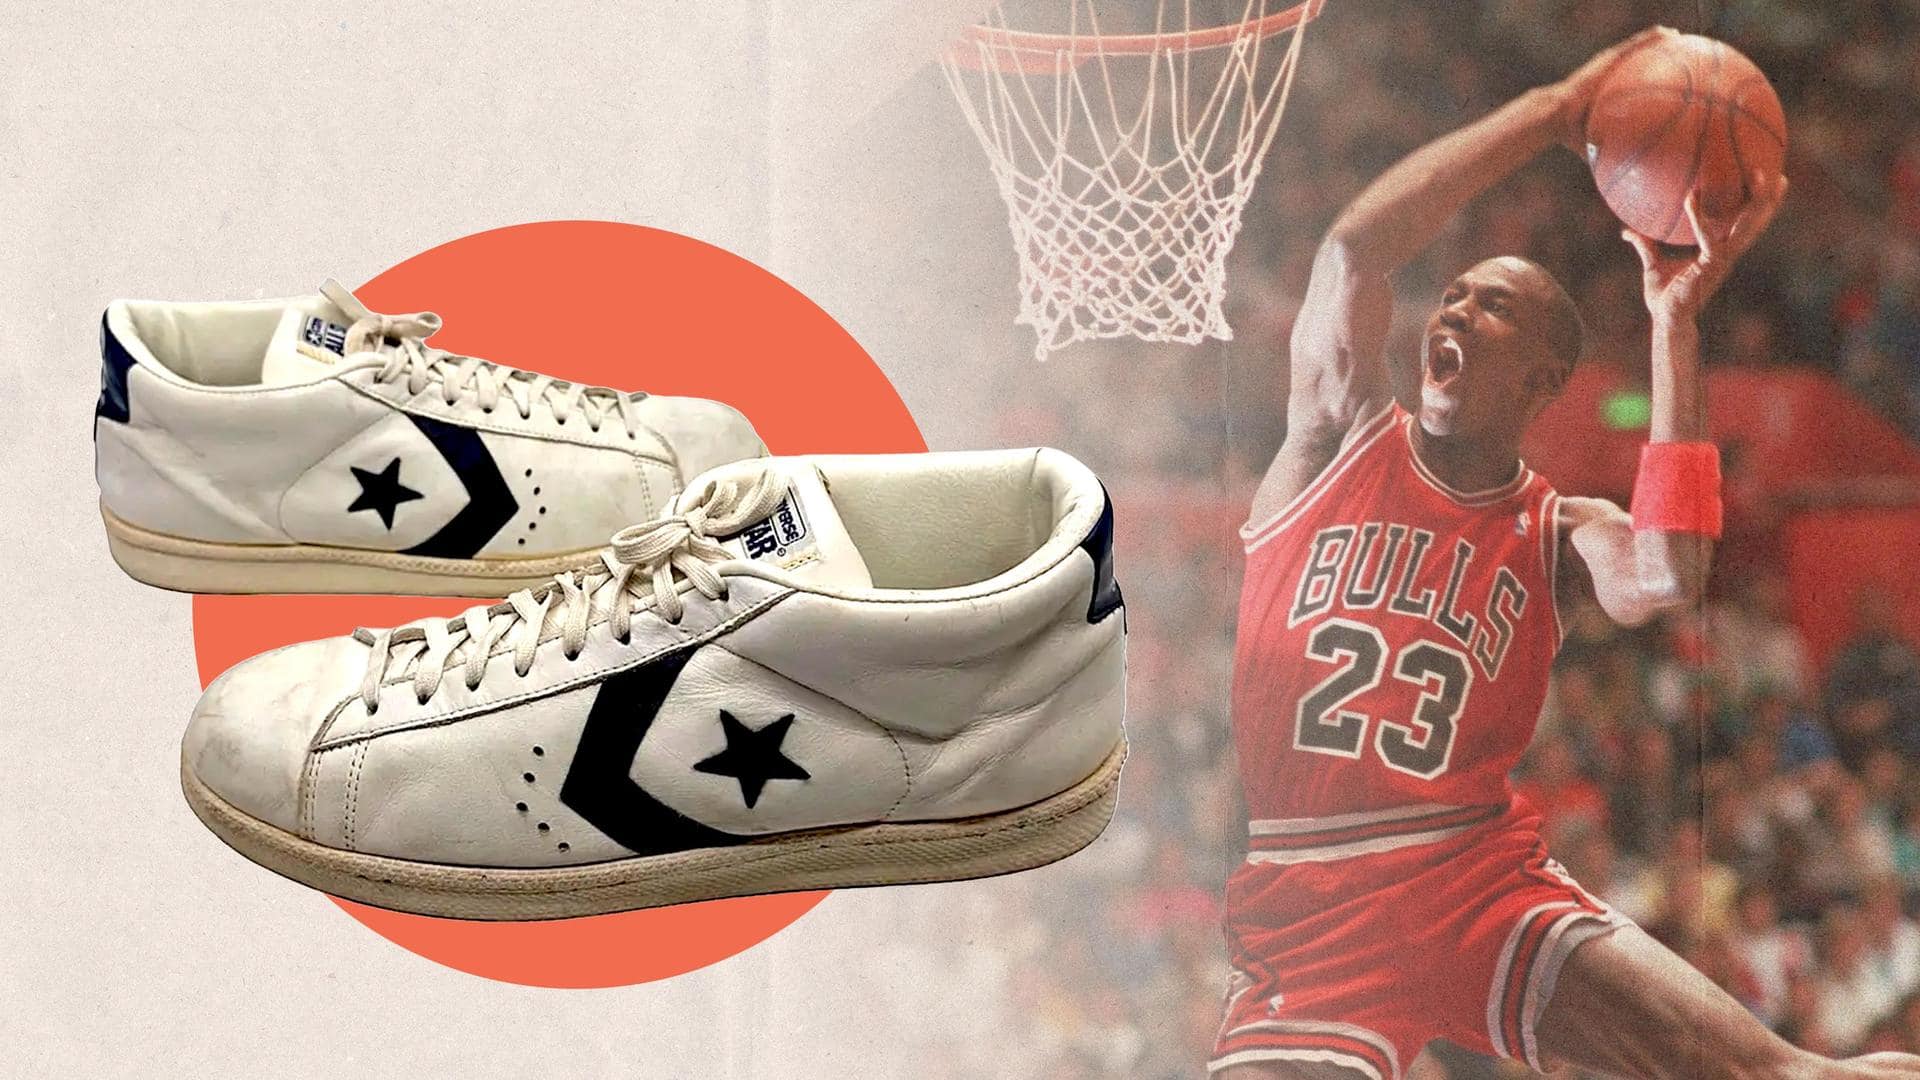 Michael Jordan's game-worn Converse shoes are now on auction